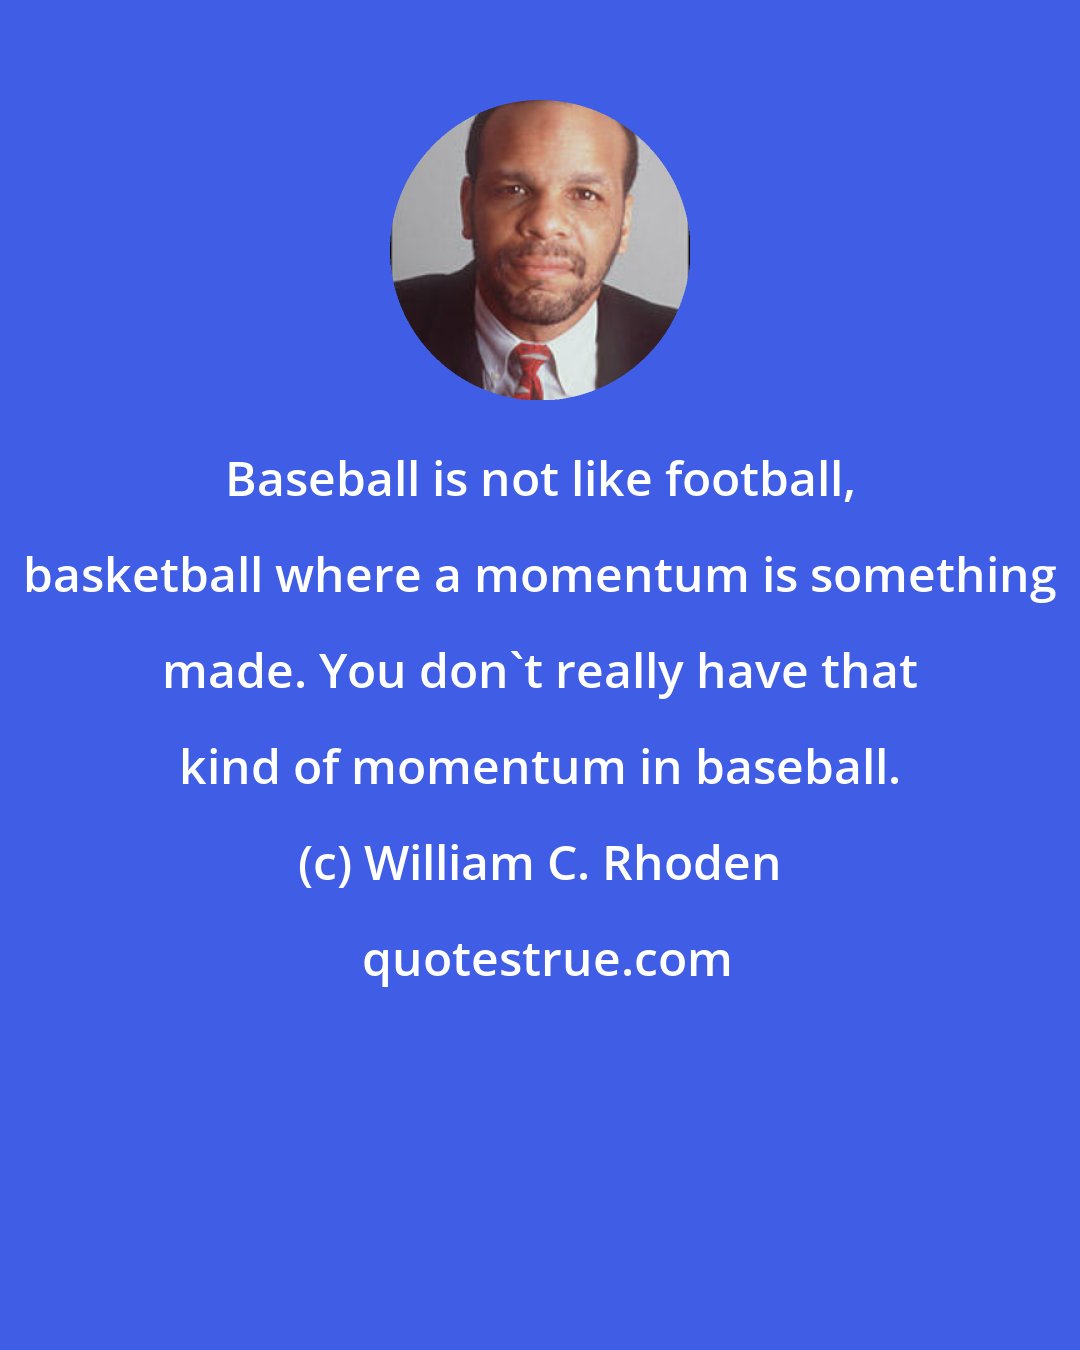 William C. Rhoden: Baseball is not like football, basketball where a momentum is something made. You don't really have that kind of momentum in baseball.